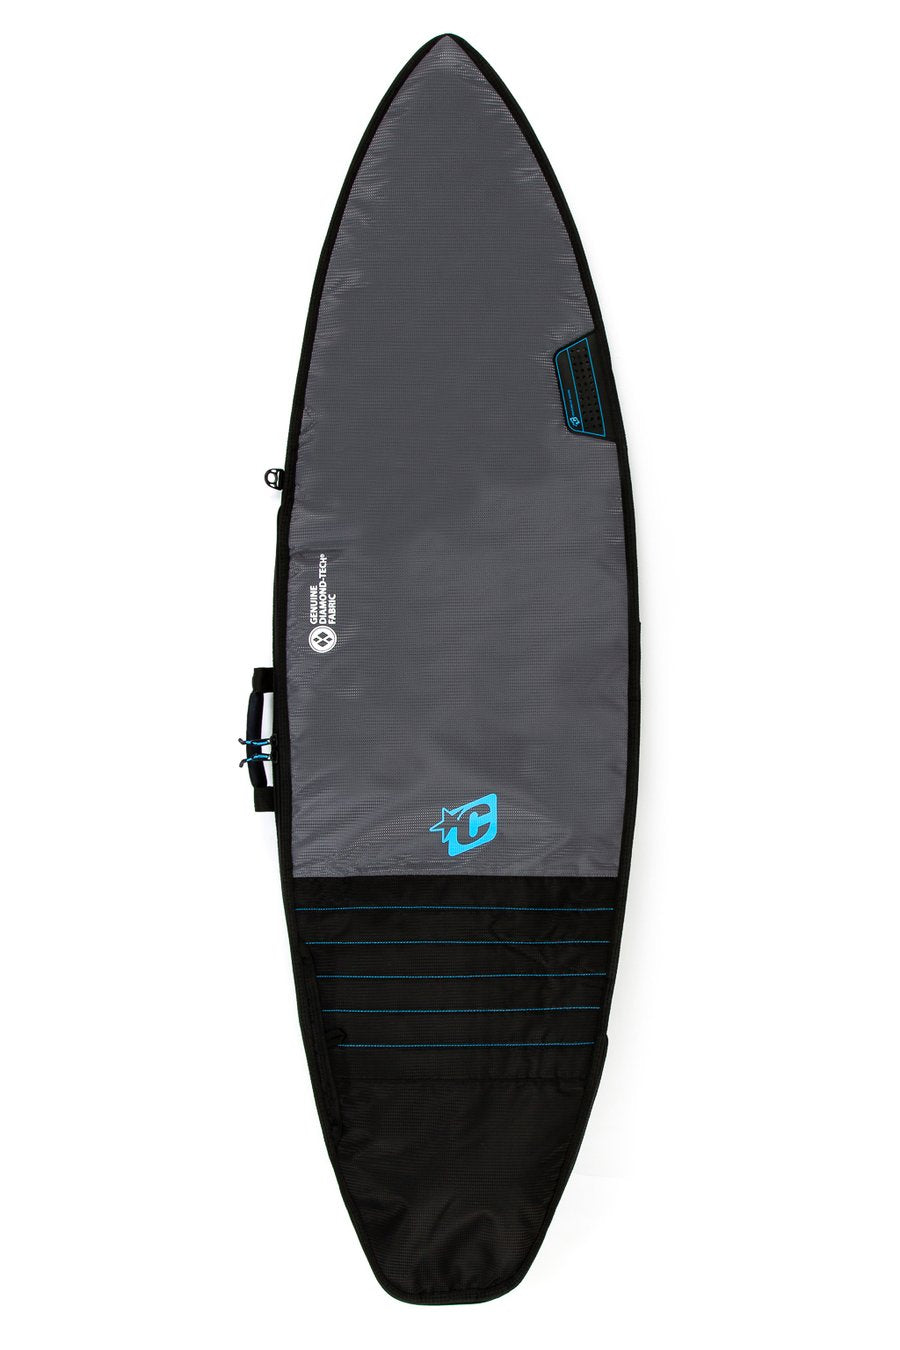 Copy of Copy of Creatures of Leisure - Shortboard Day Use: Charcoal Cyan 7'1"